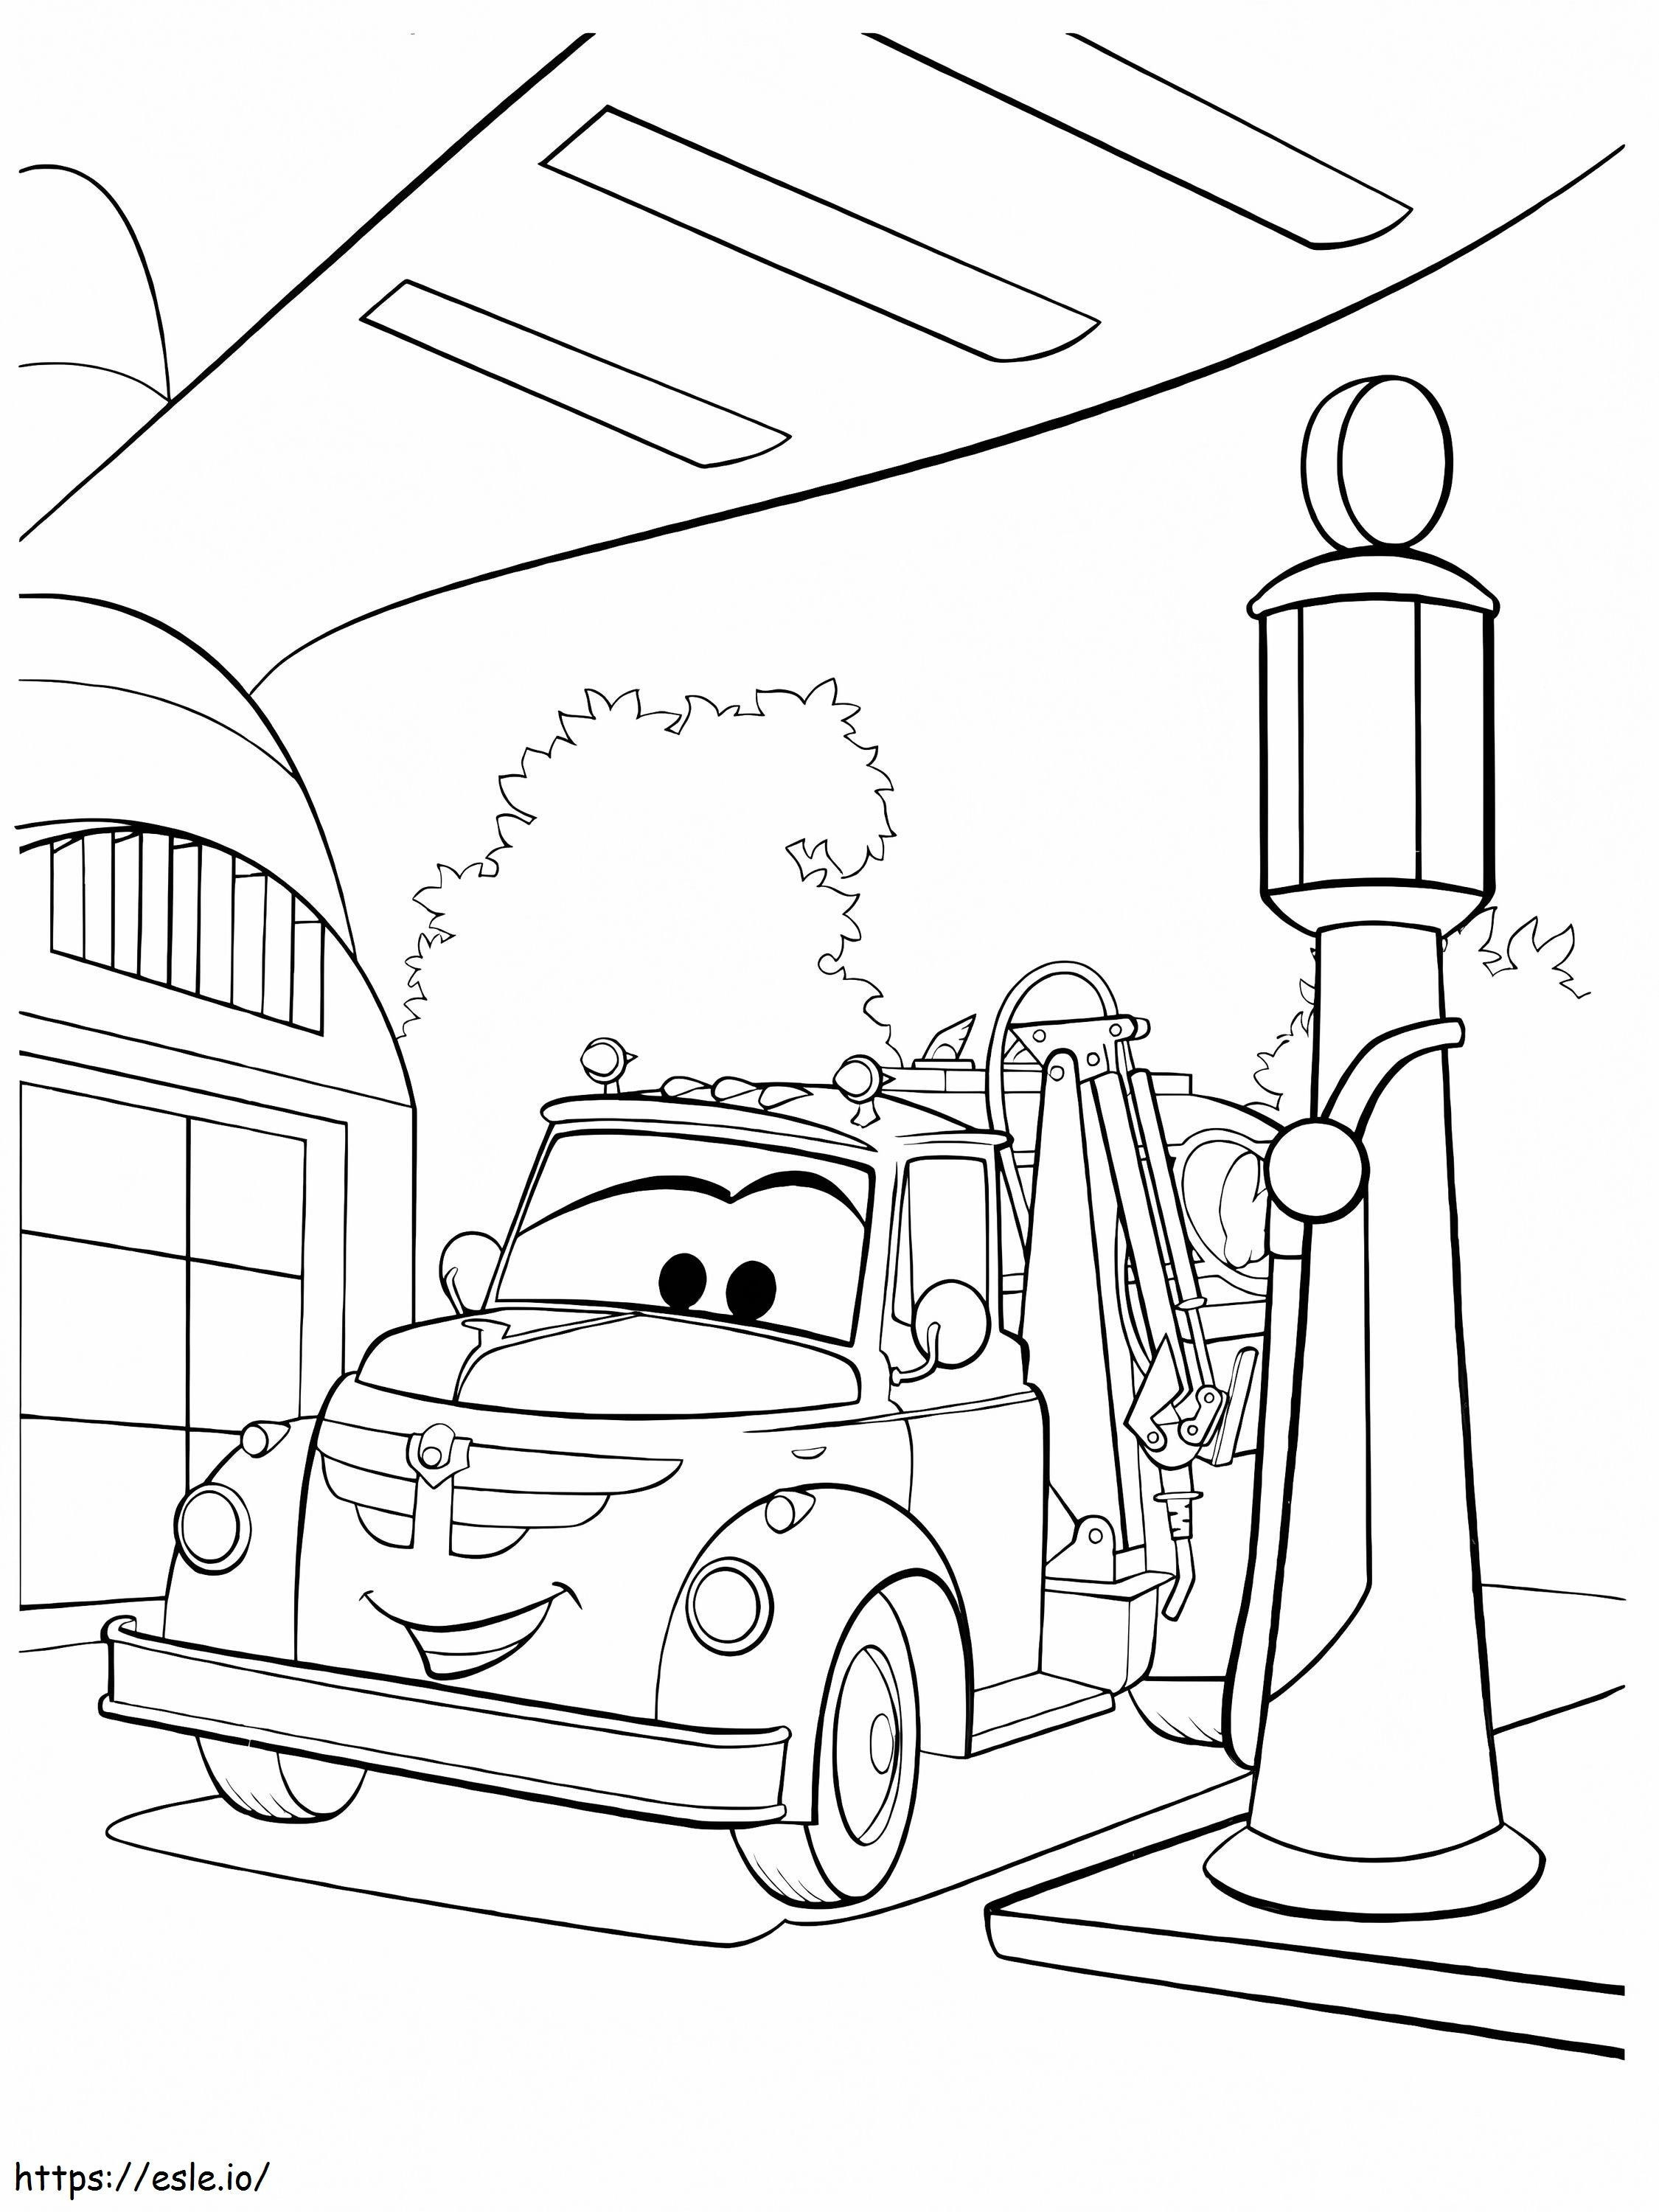 Cartoon Gas Station coloring page